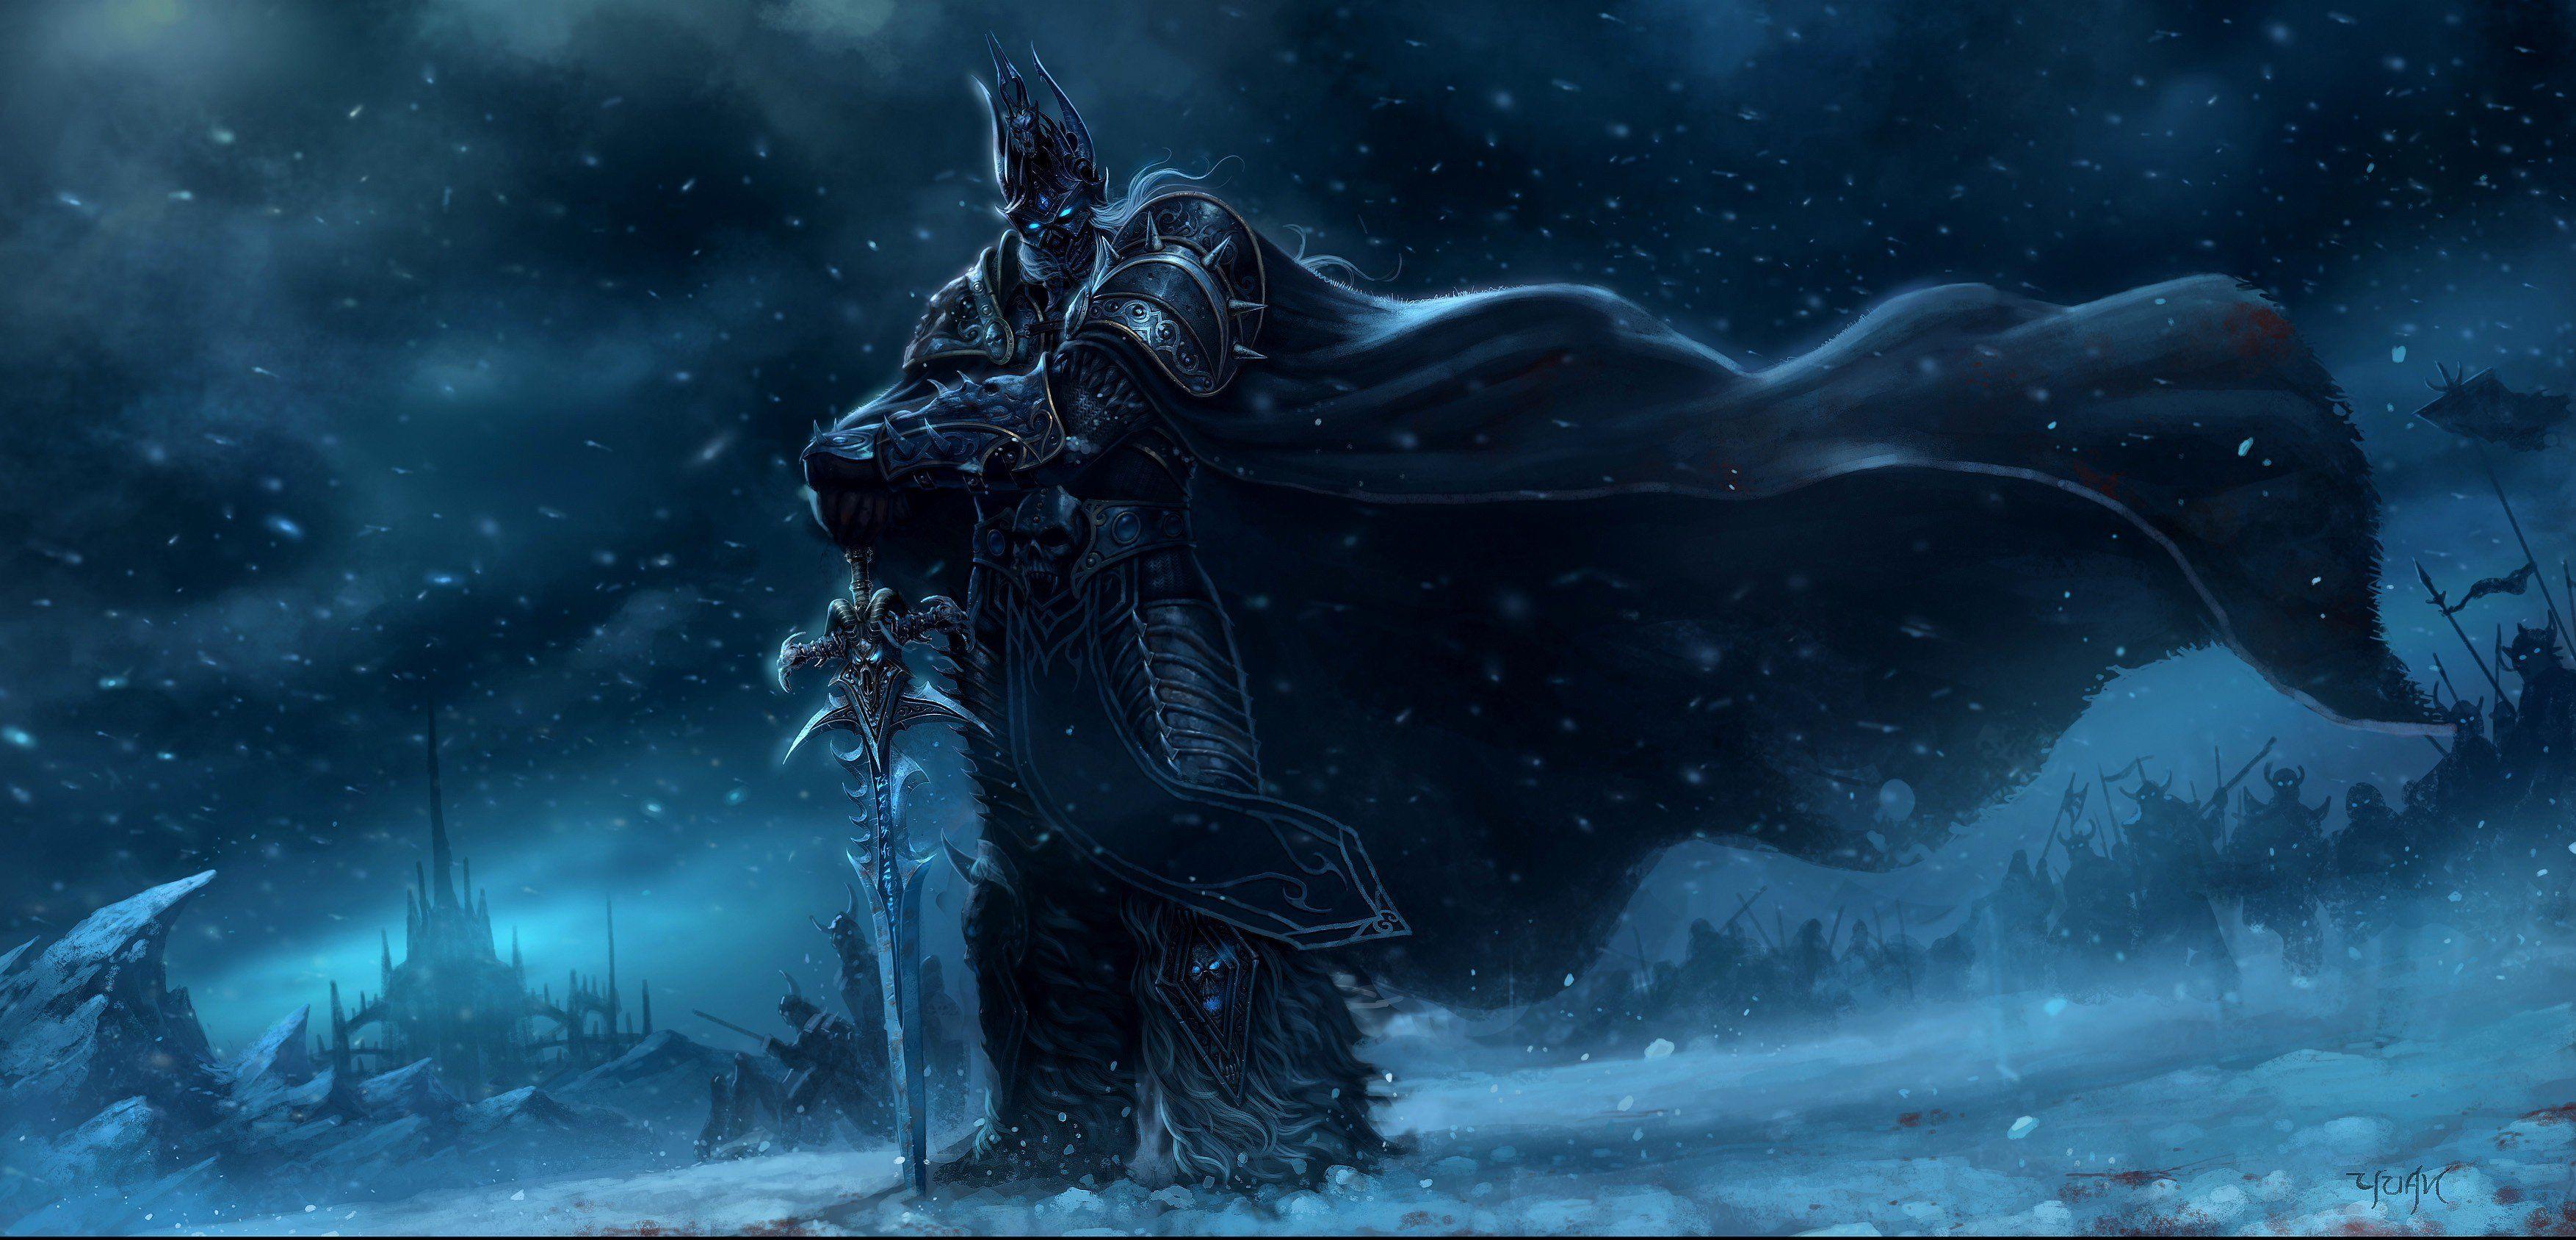 World Of Warcraft: Wrath Of The Lich King wallpaper, Video Game, HQ